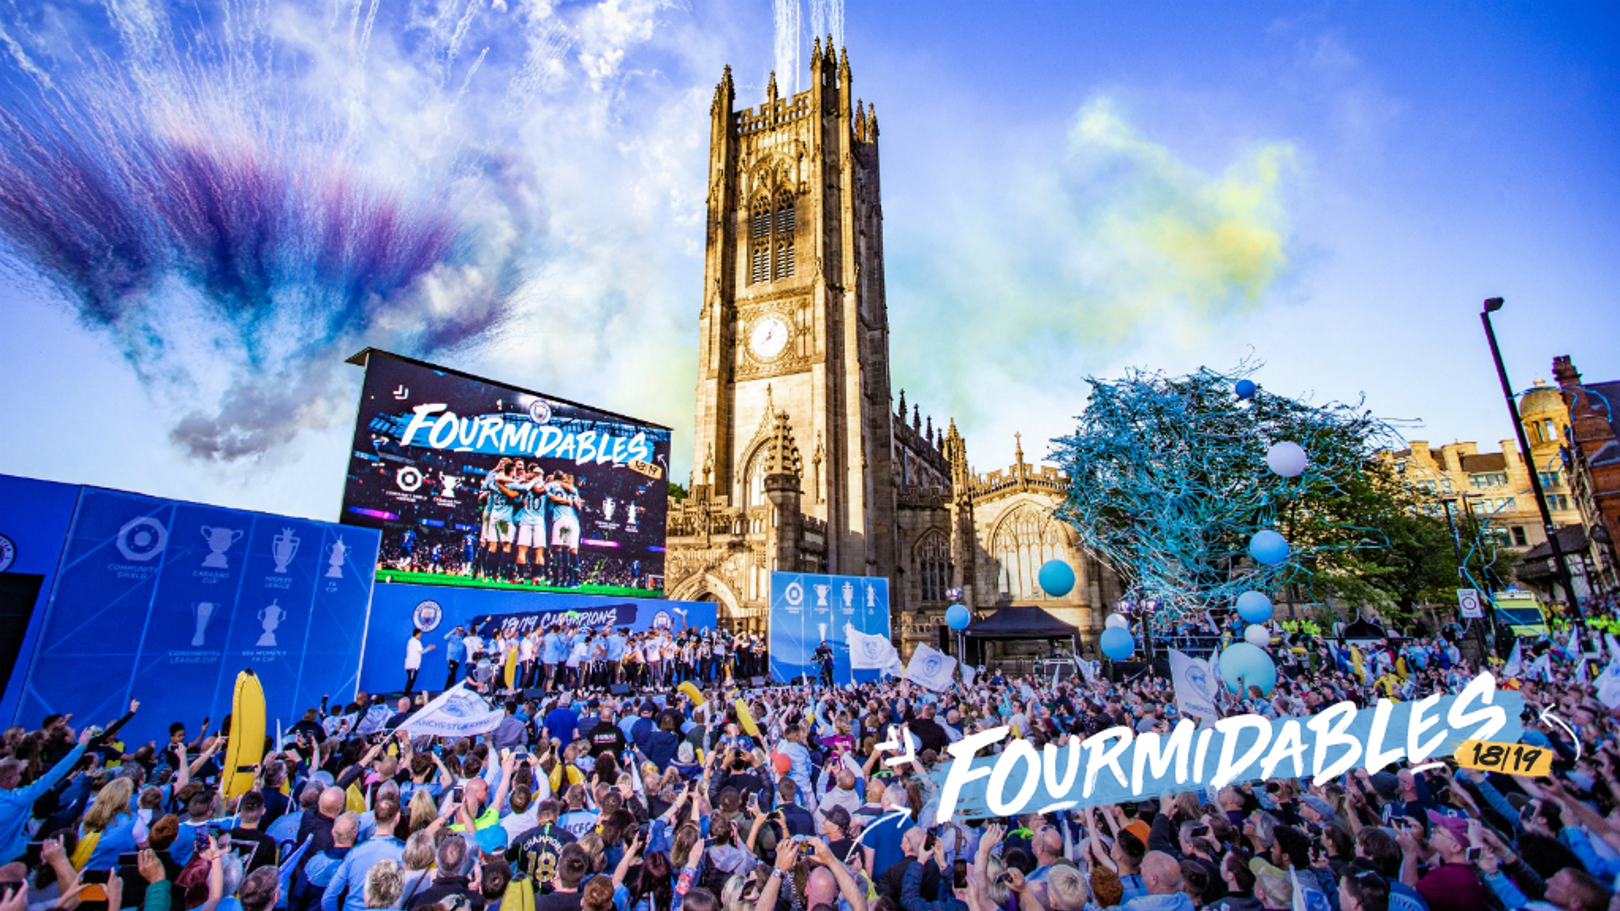 Manchester turns blue for champions parade